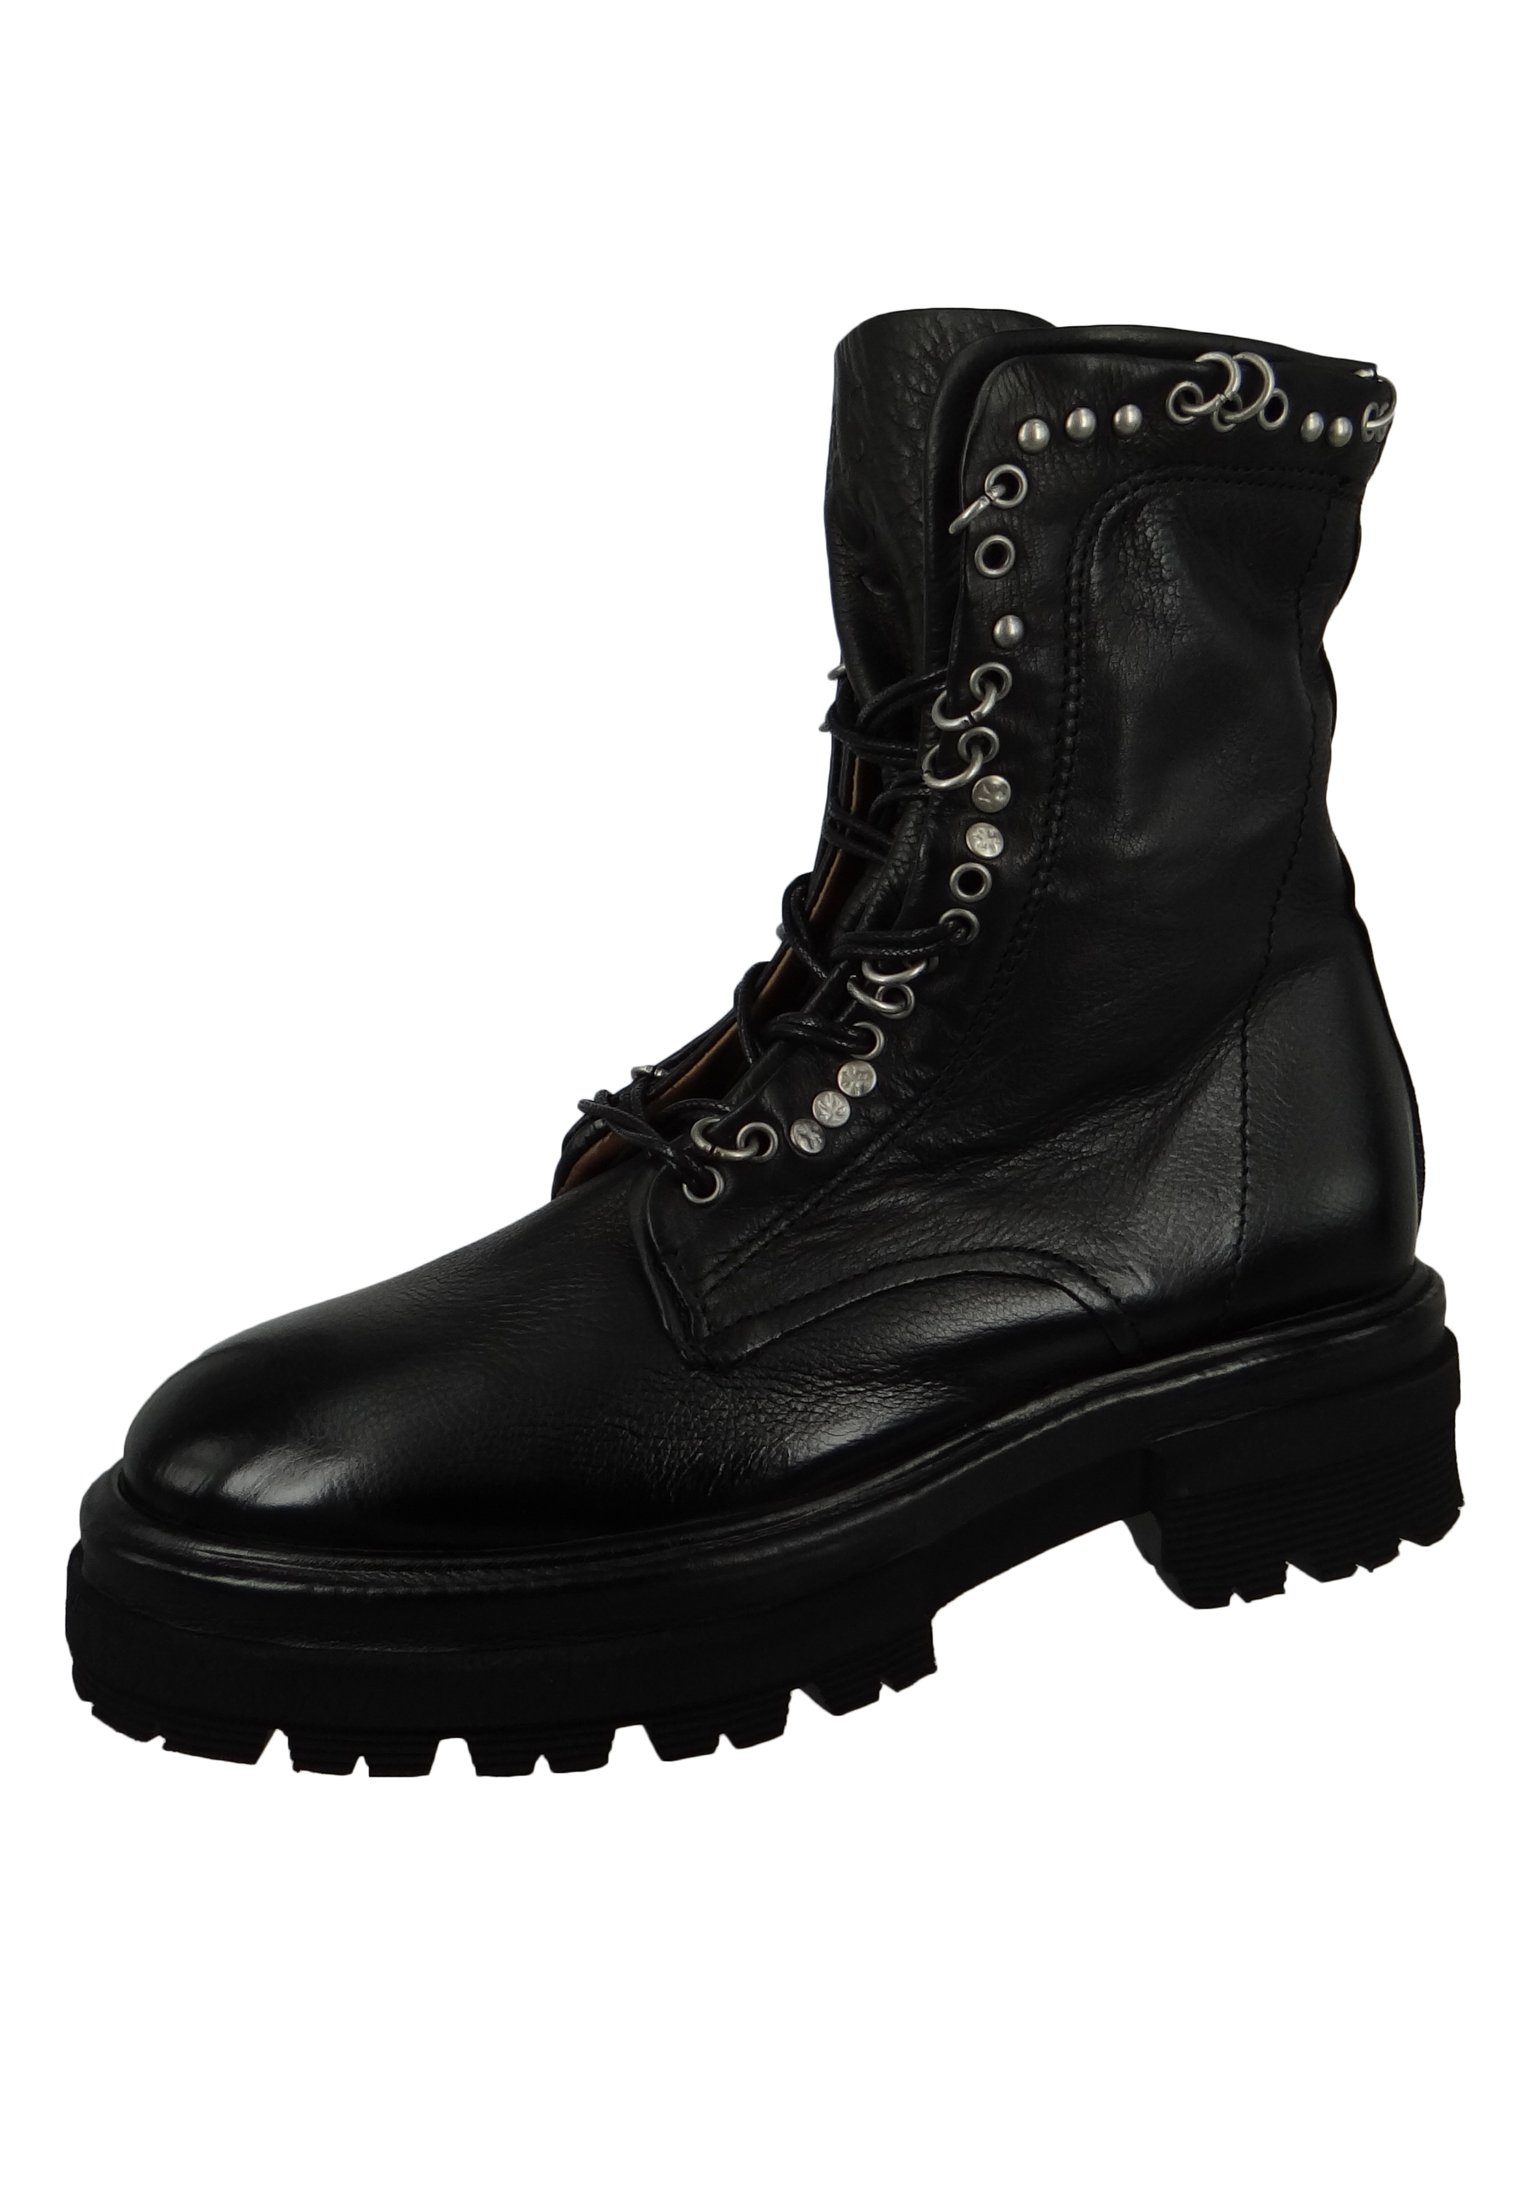 A59210-101-6002 A.S.98 Stiefelette Nero Hell